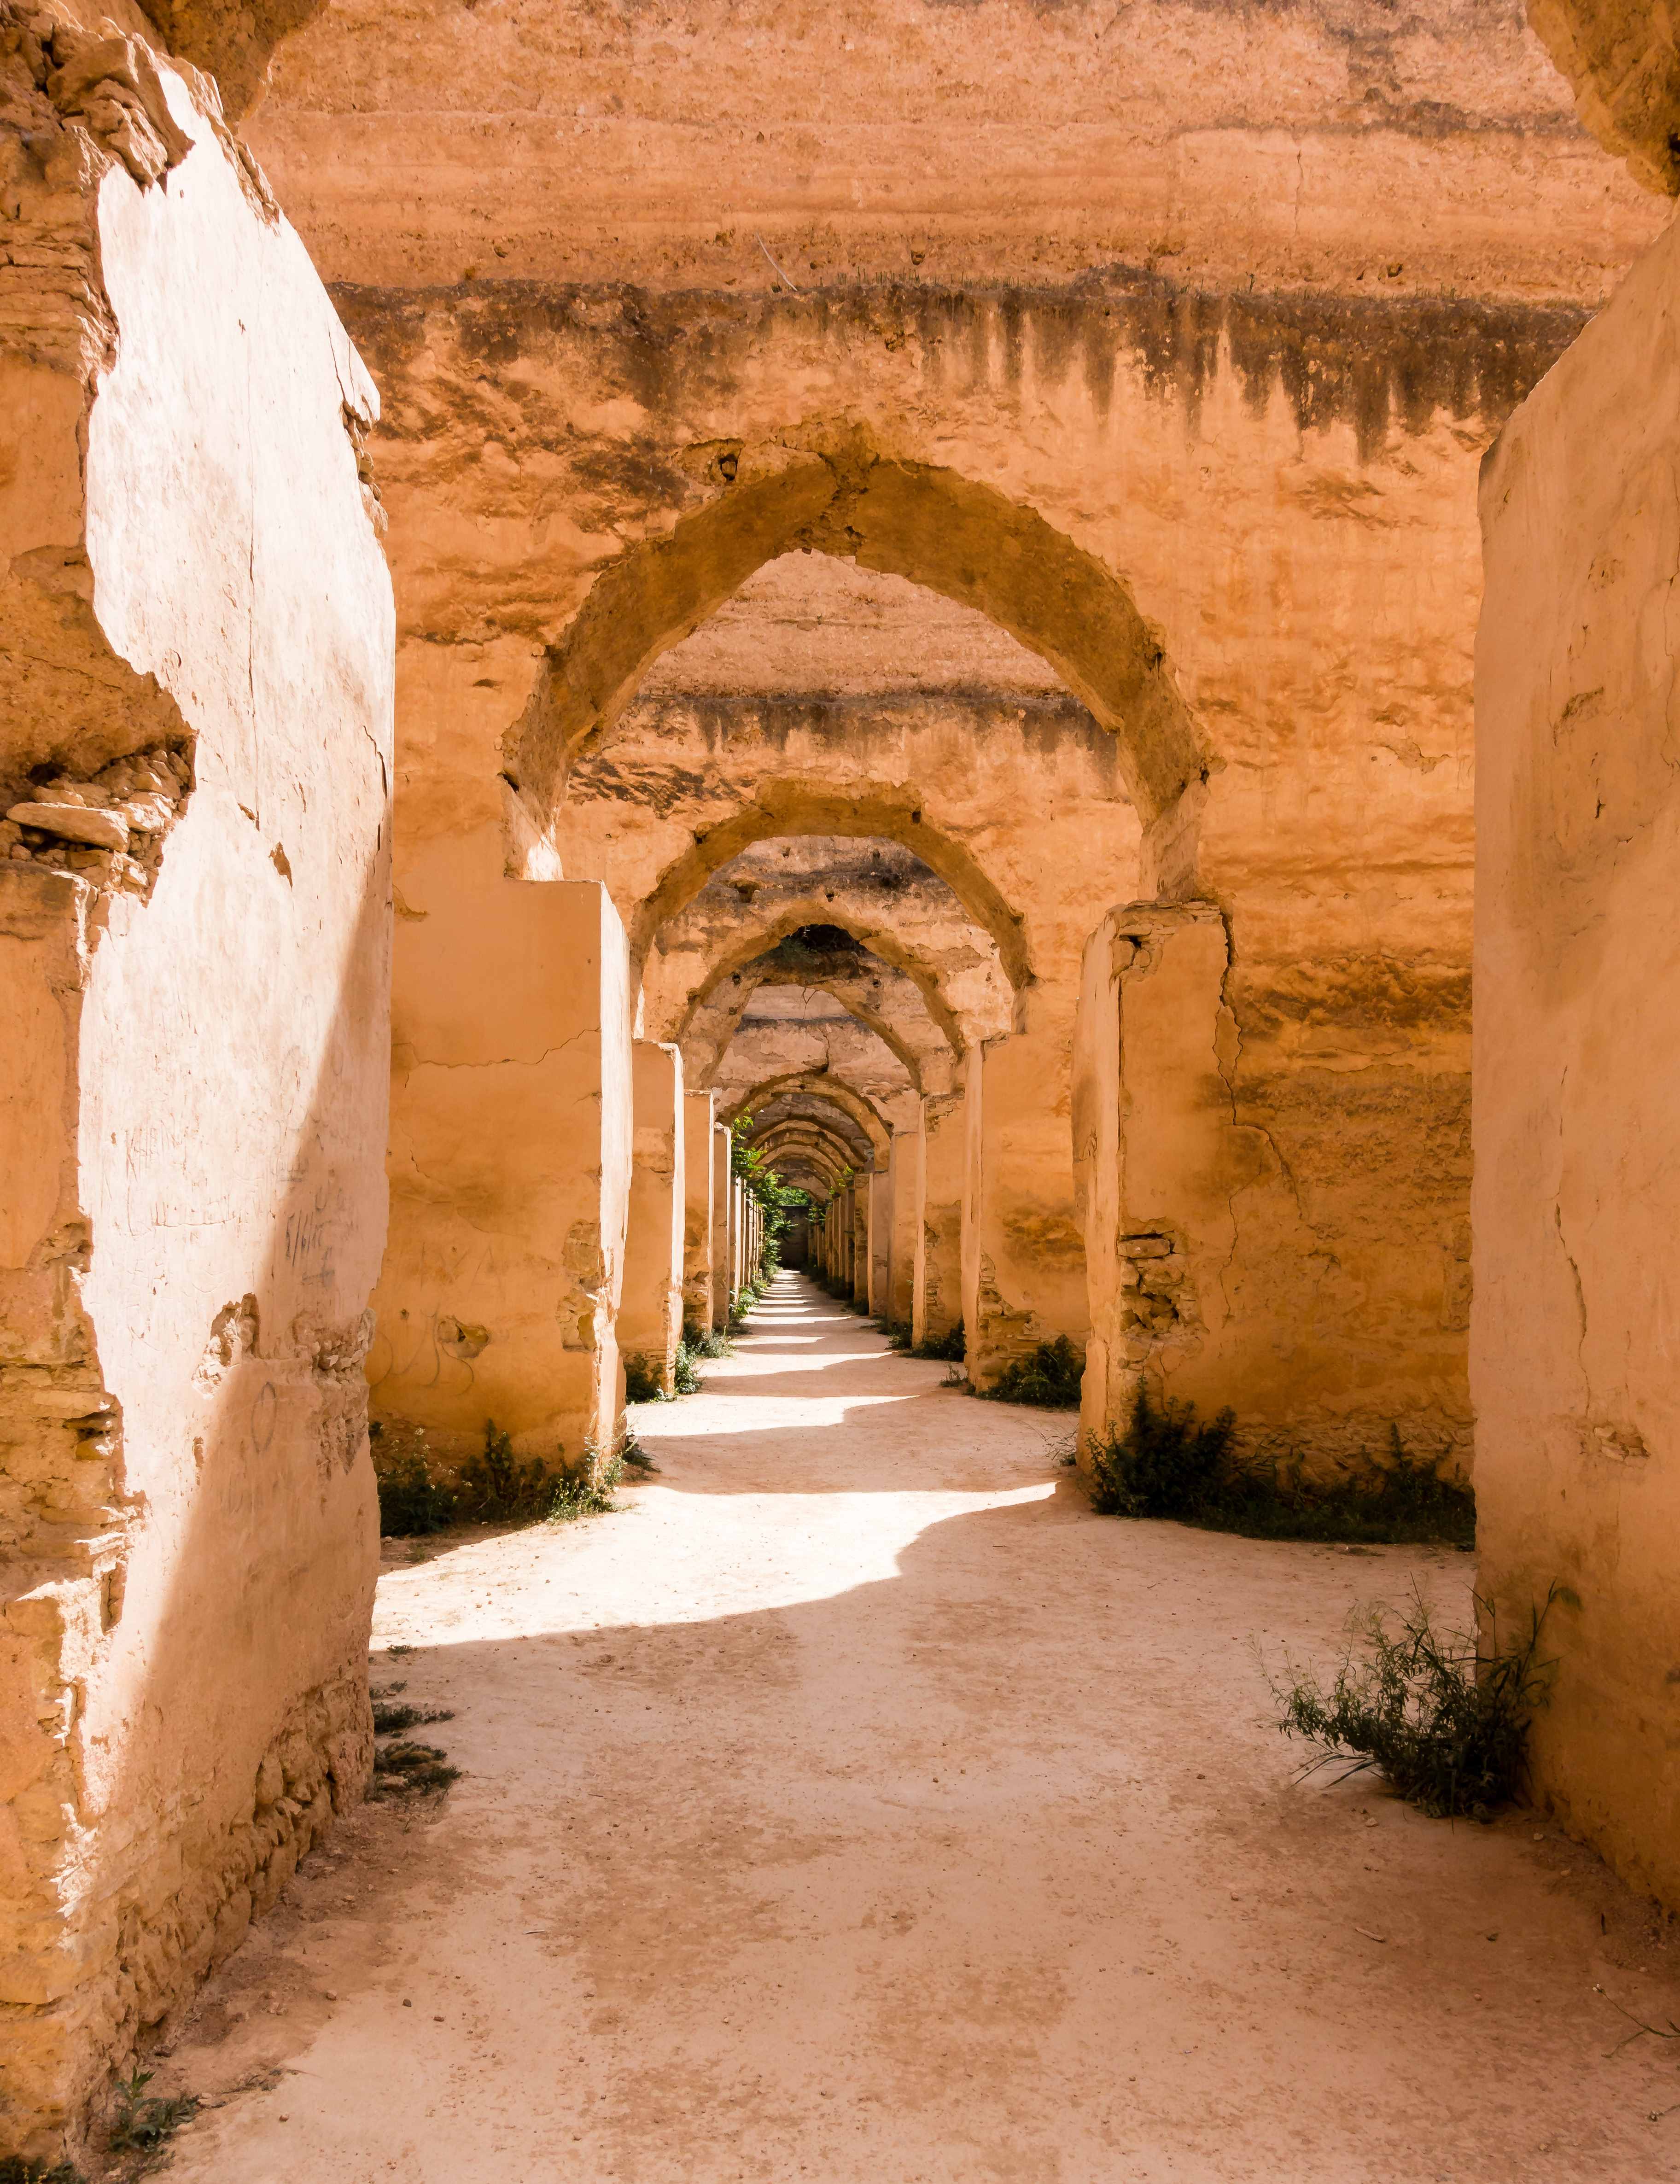 Ruins of the Ancient Royal Stables in Meknes, Morocco.